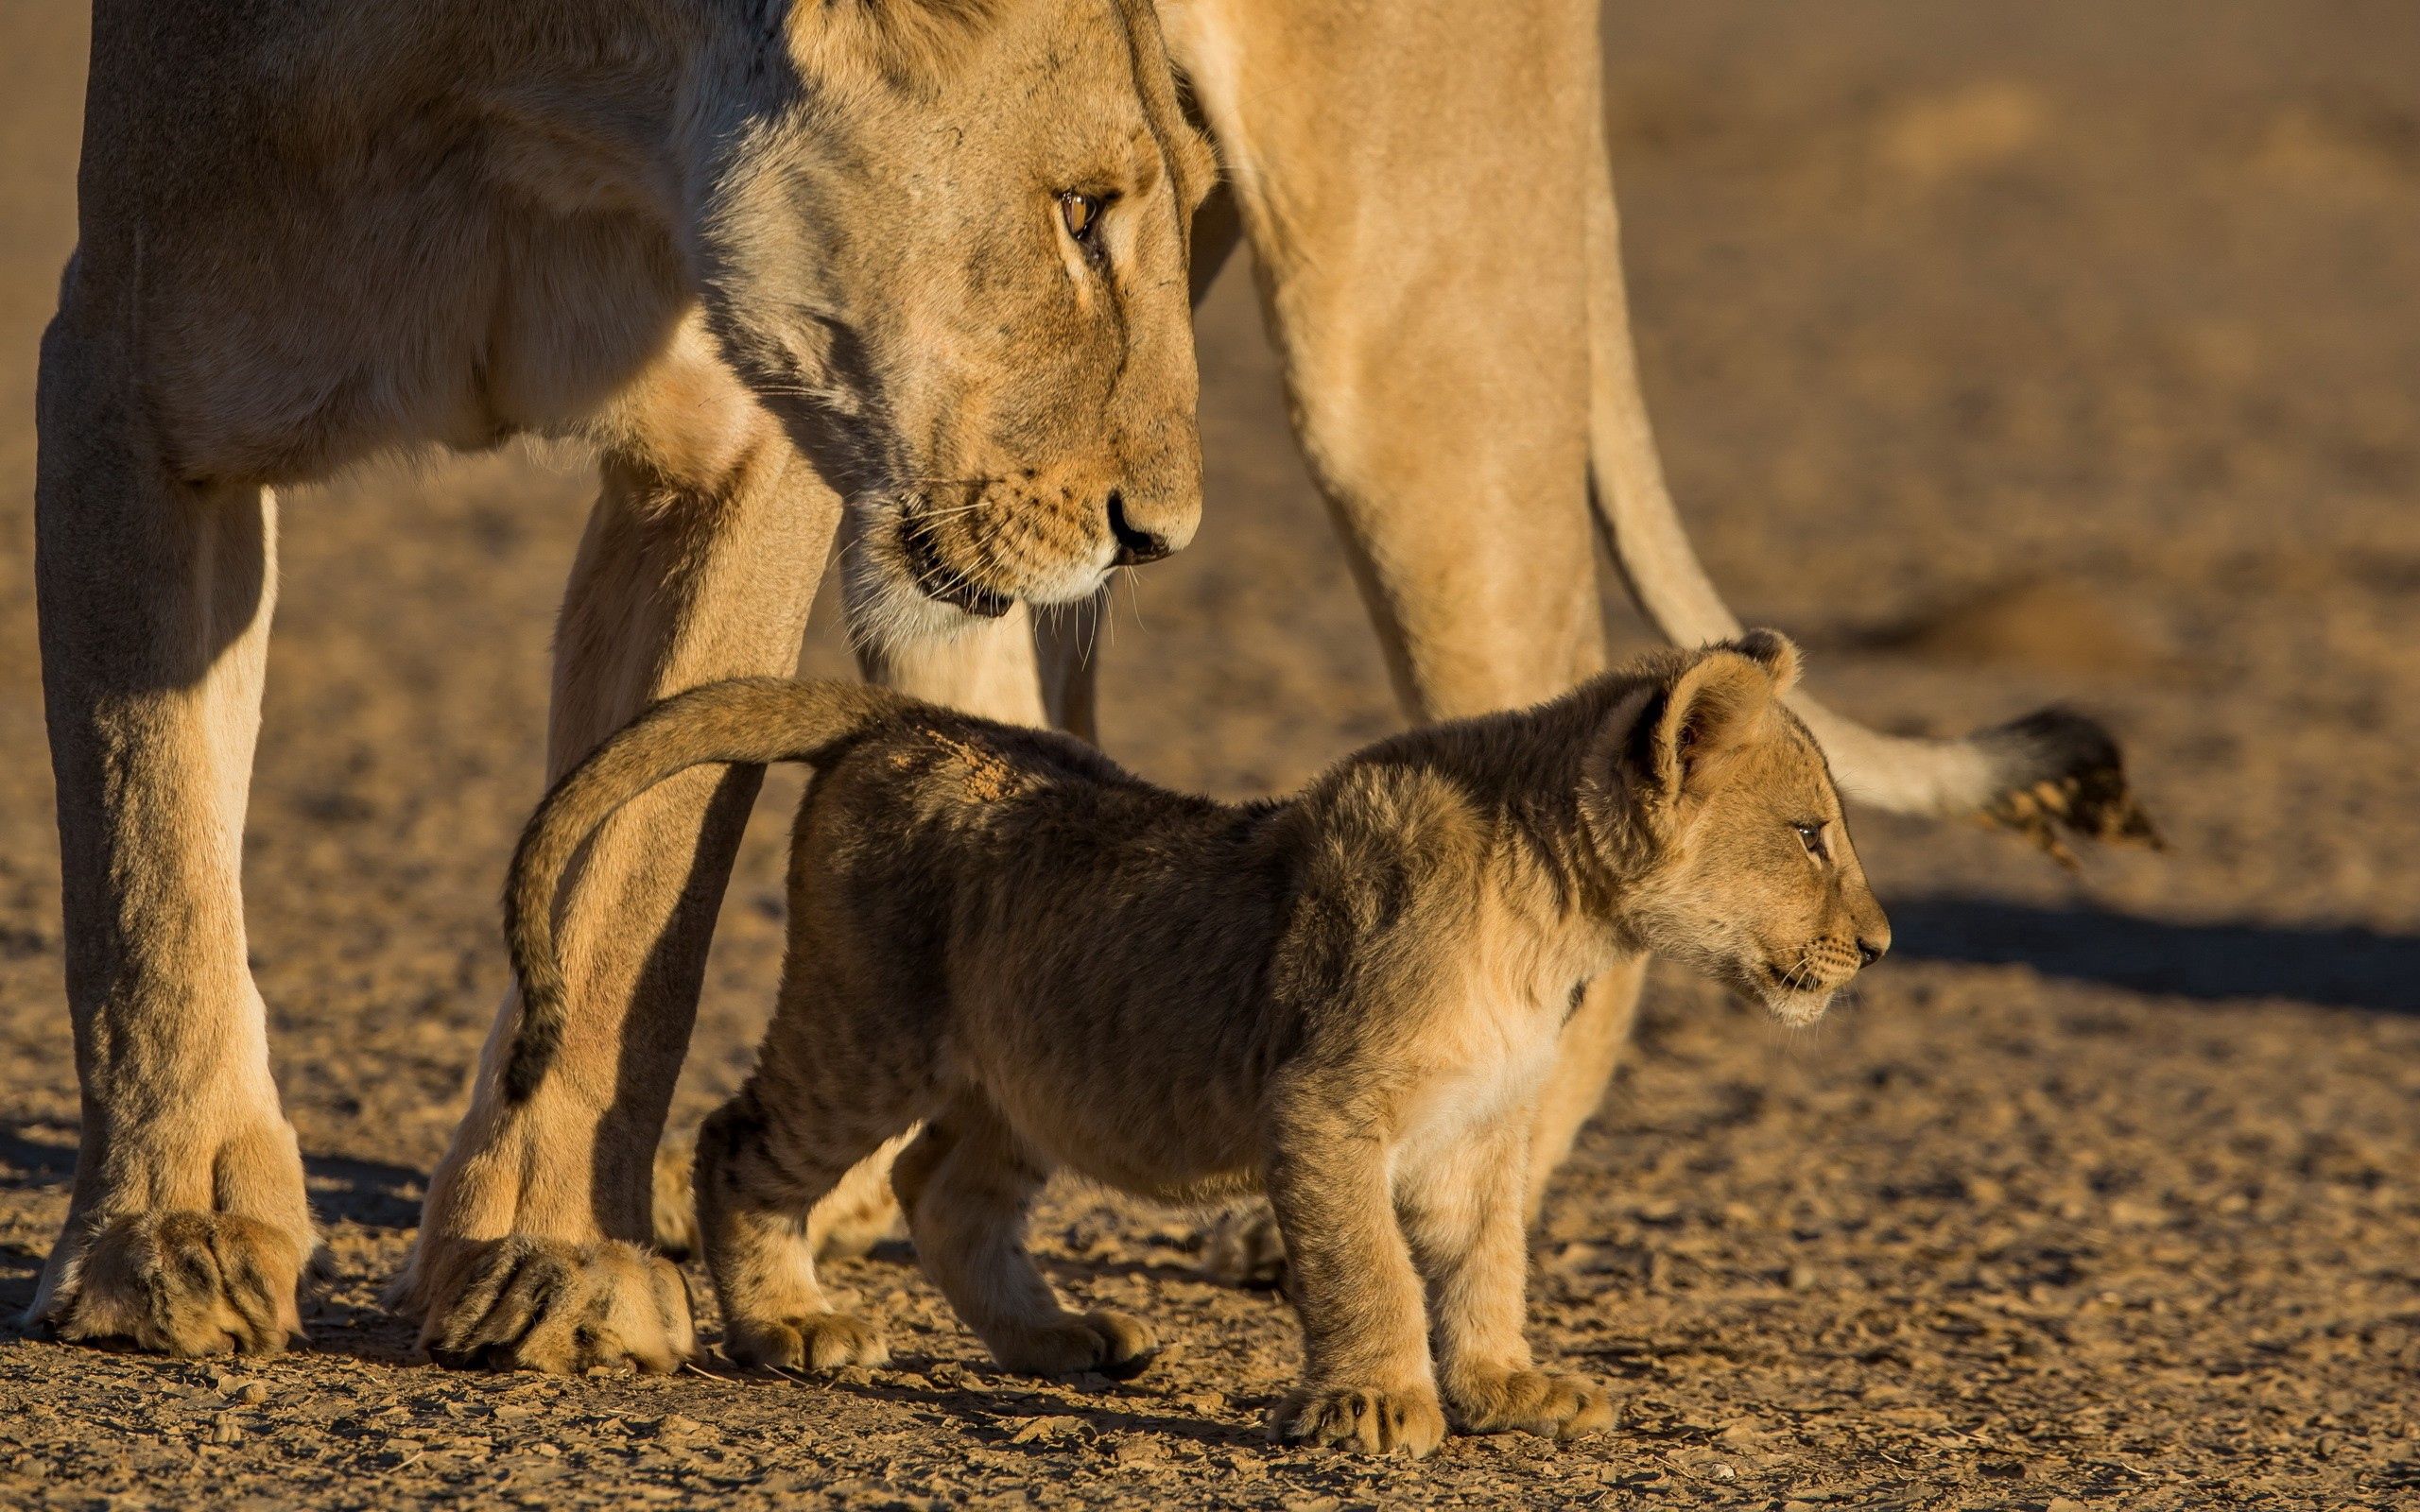 care, animals, young, lion, lioness, joey iphone wallpaper